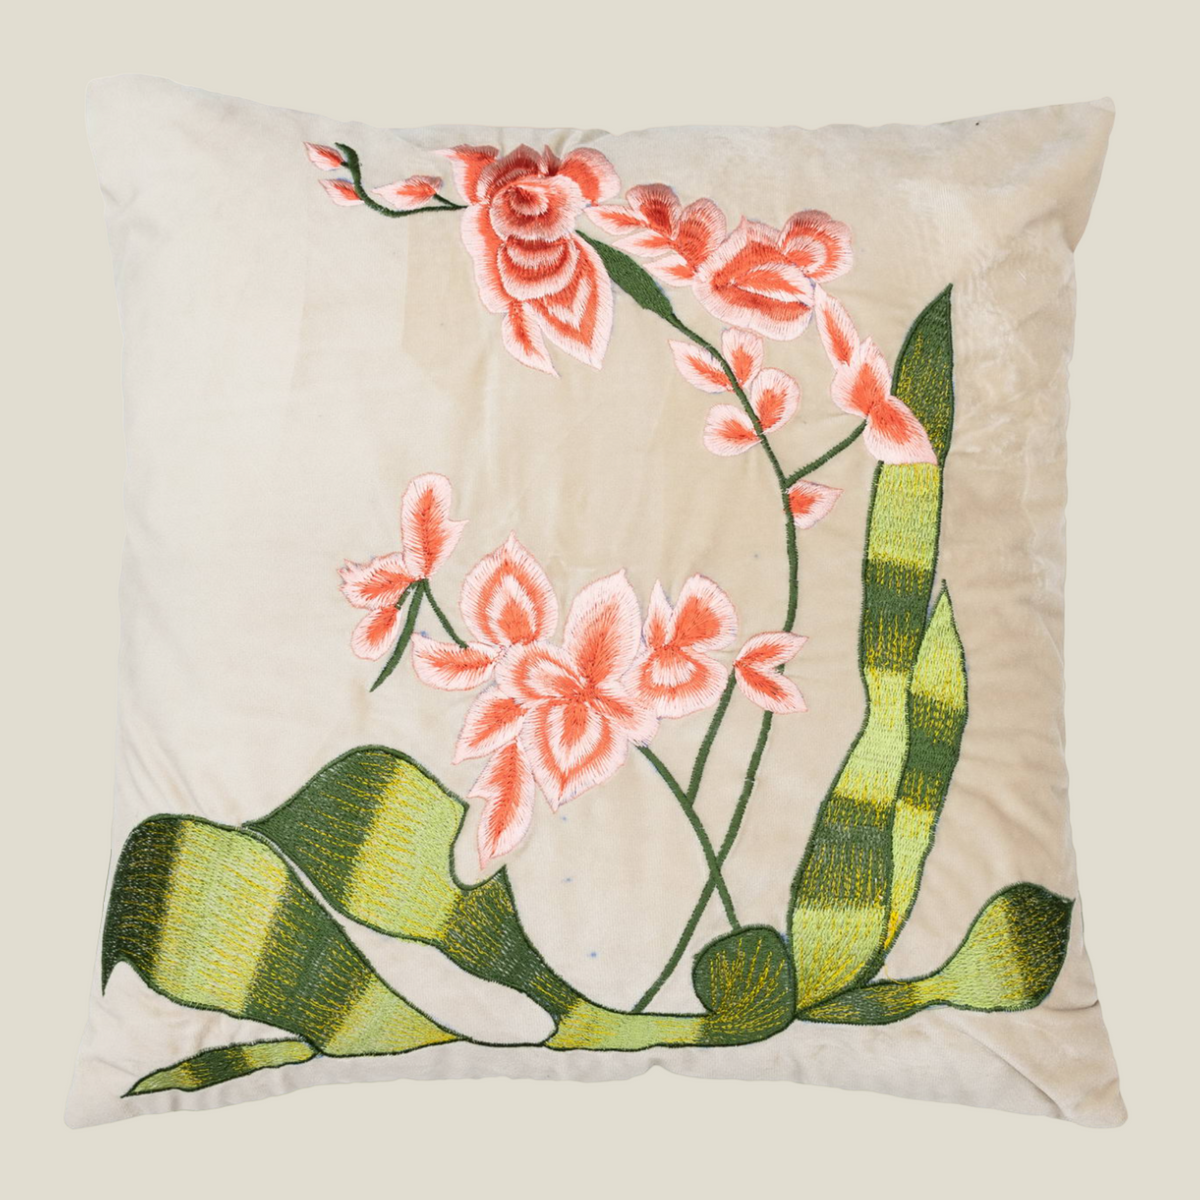 The Luxelife Beige Velvet Floral Orange Embroidered Cushion Cover